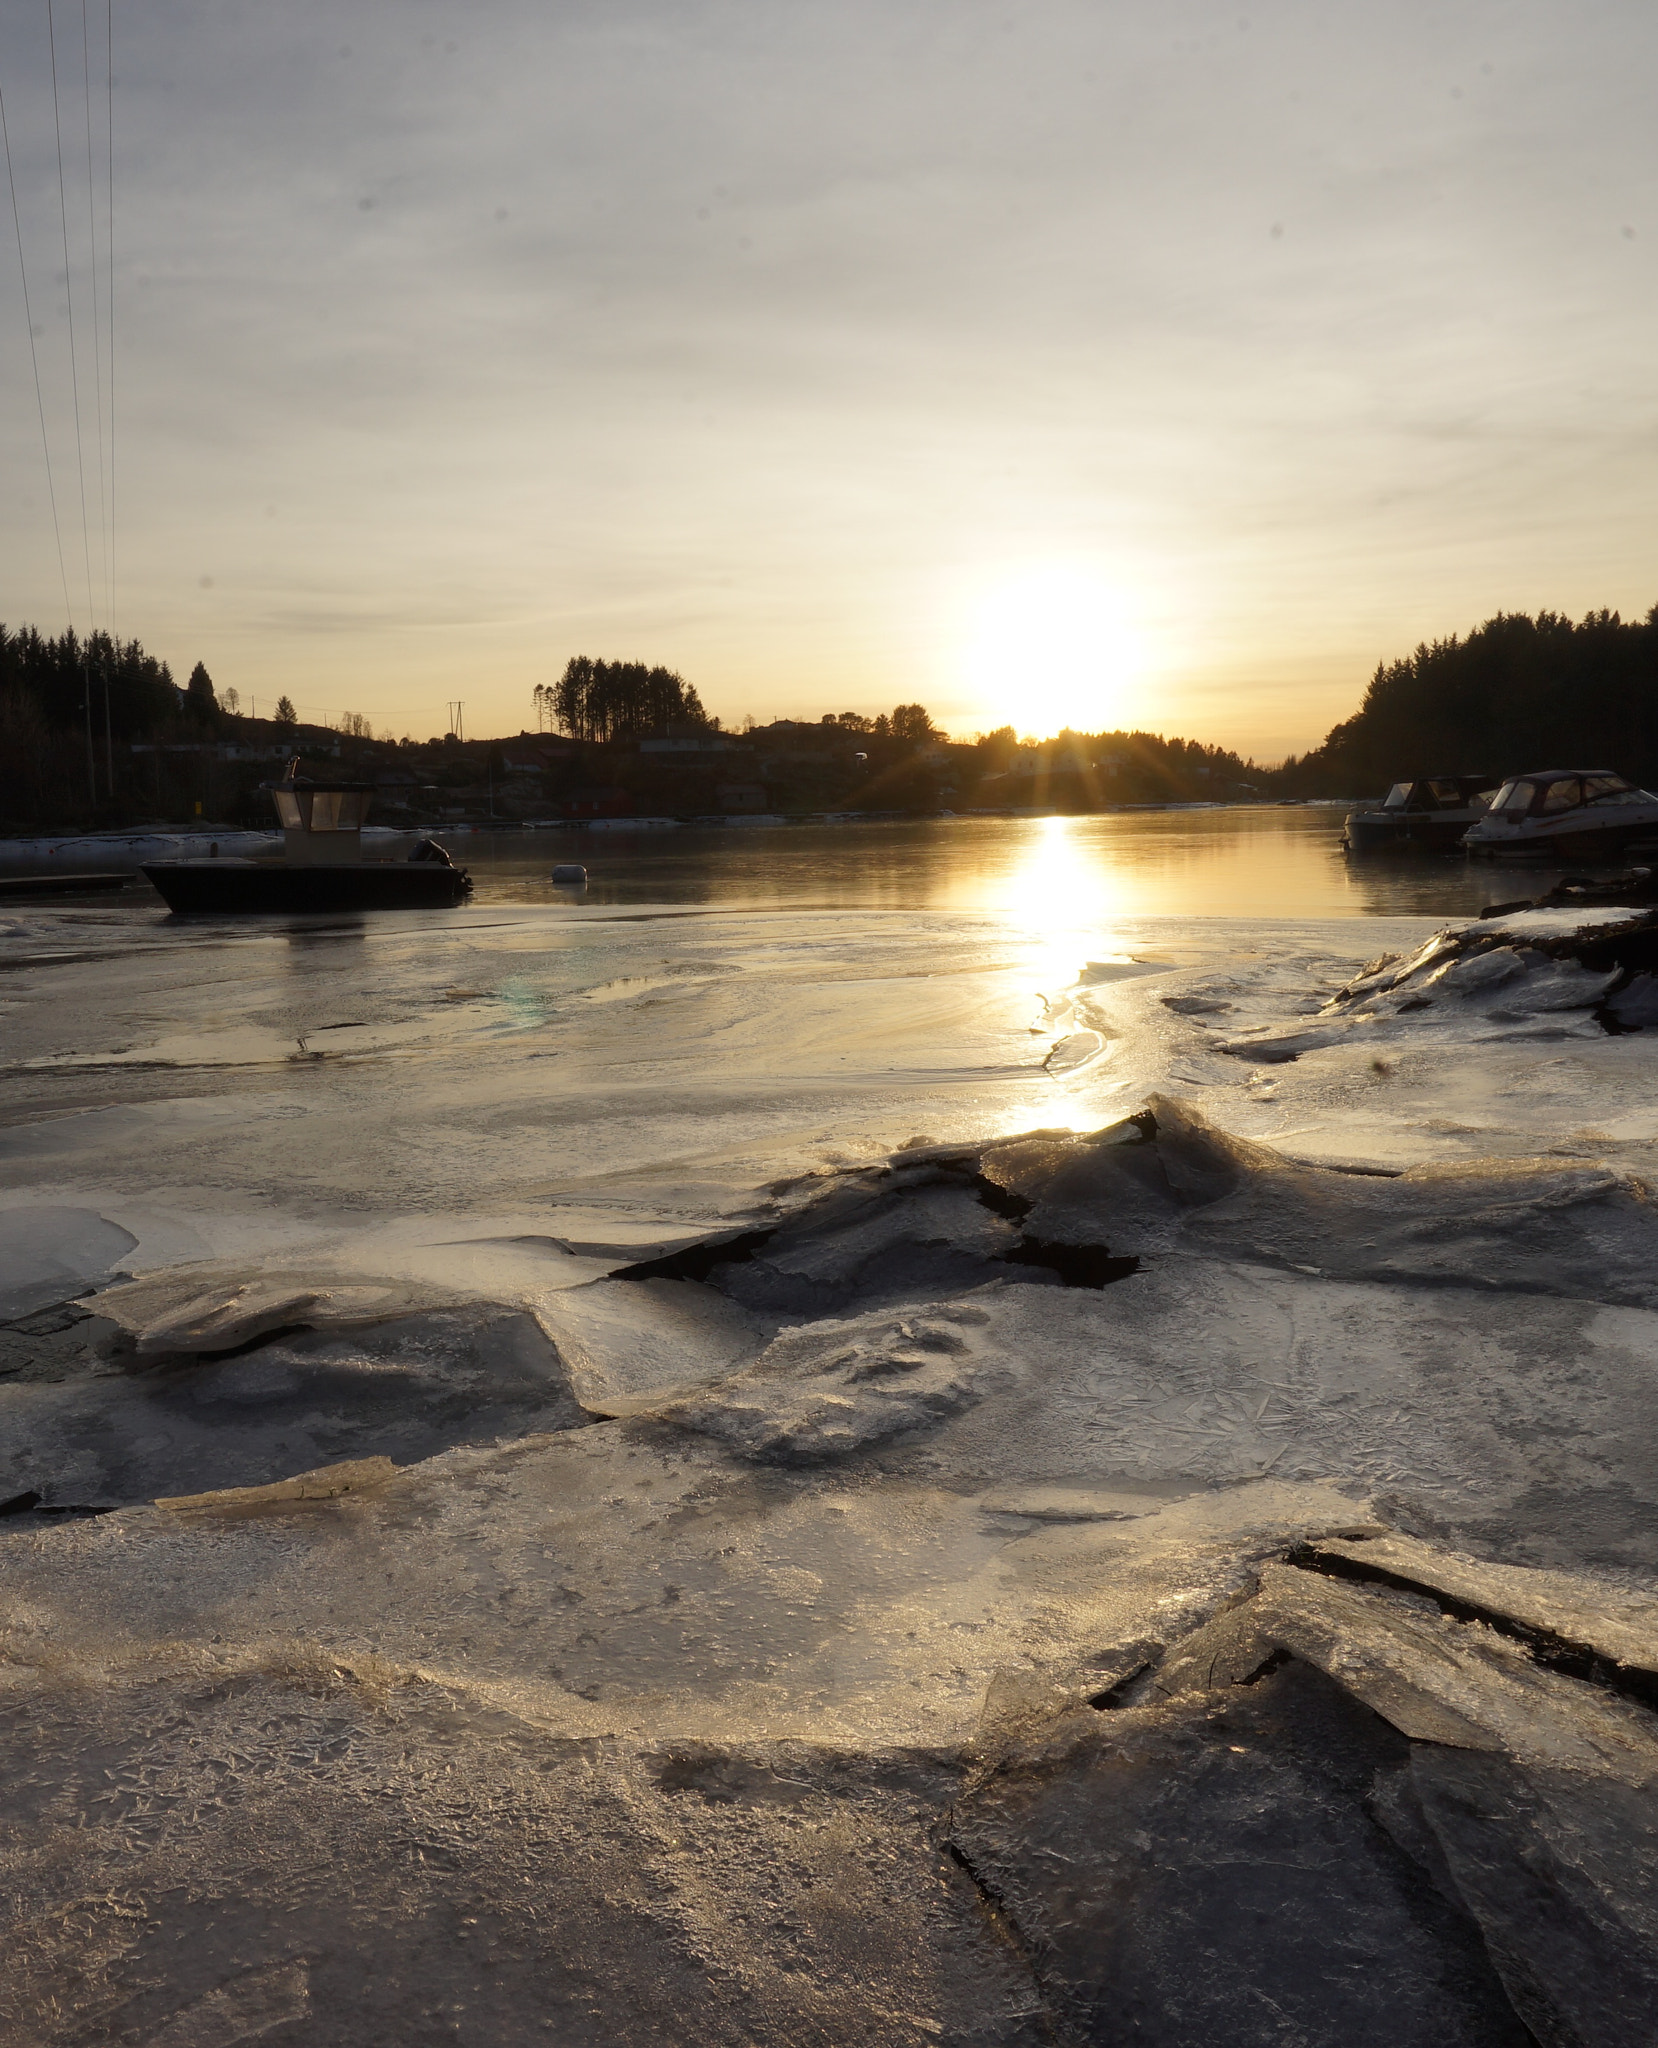 Sony a7 sample photo. From rossland 35 km north of bergen, norway. frozen salt water close to sunset photography